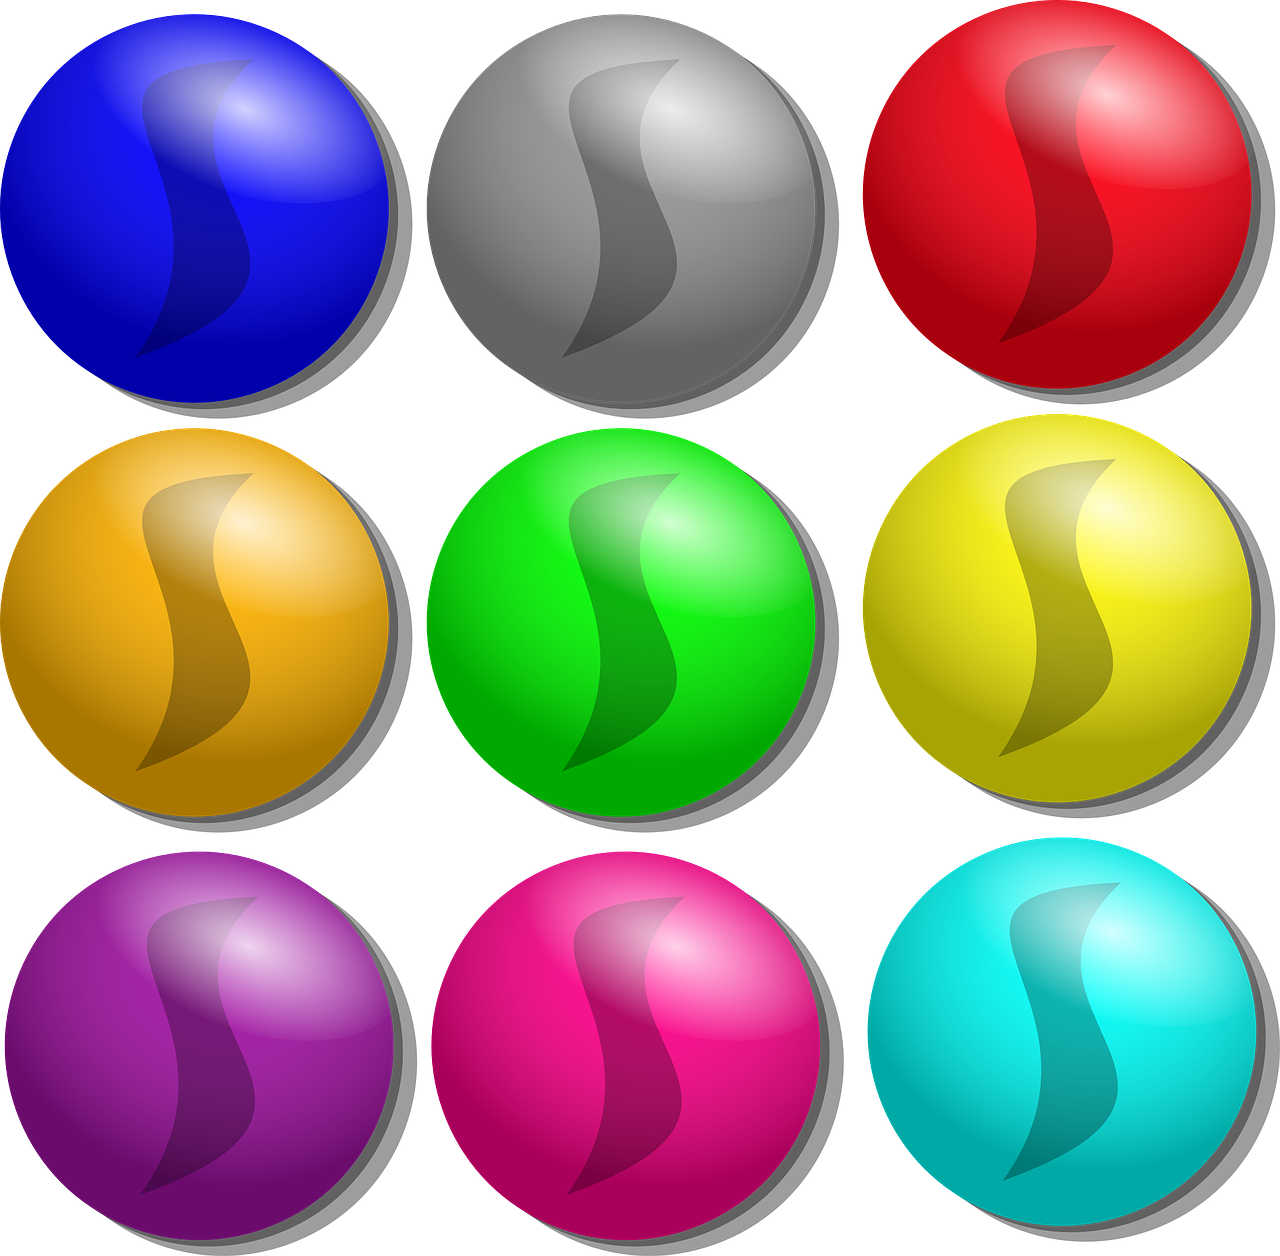 marbles colorful round free photo